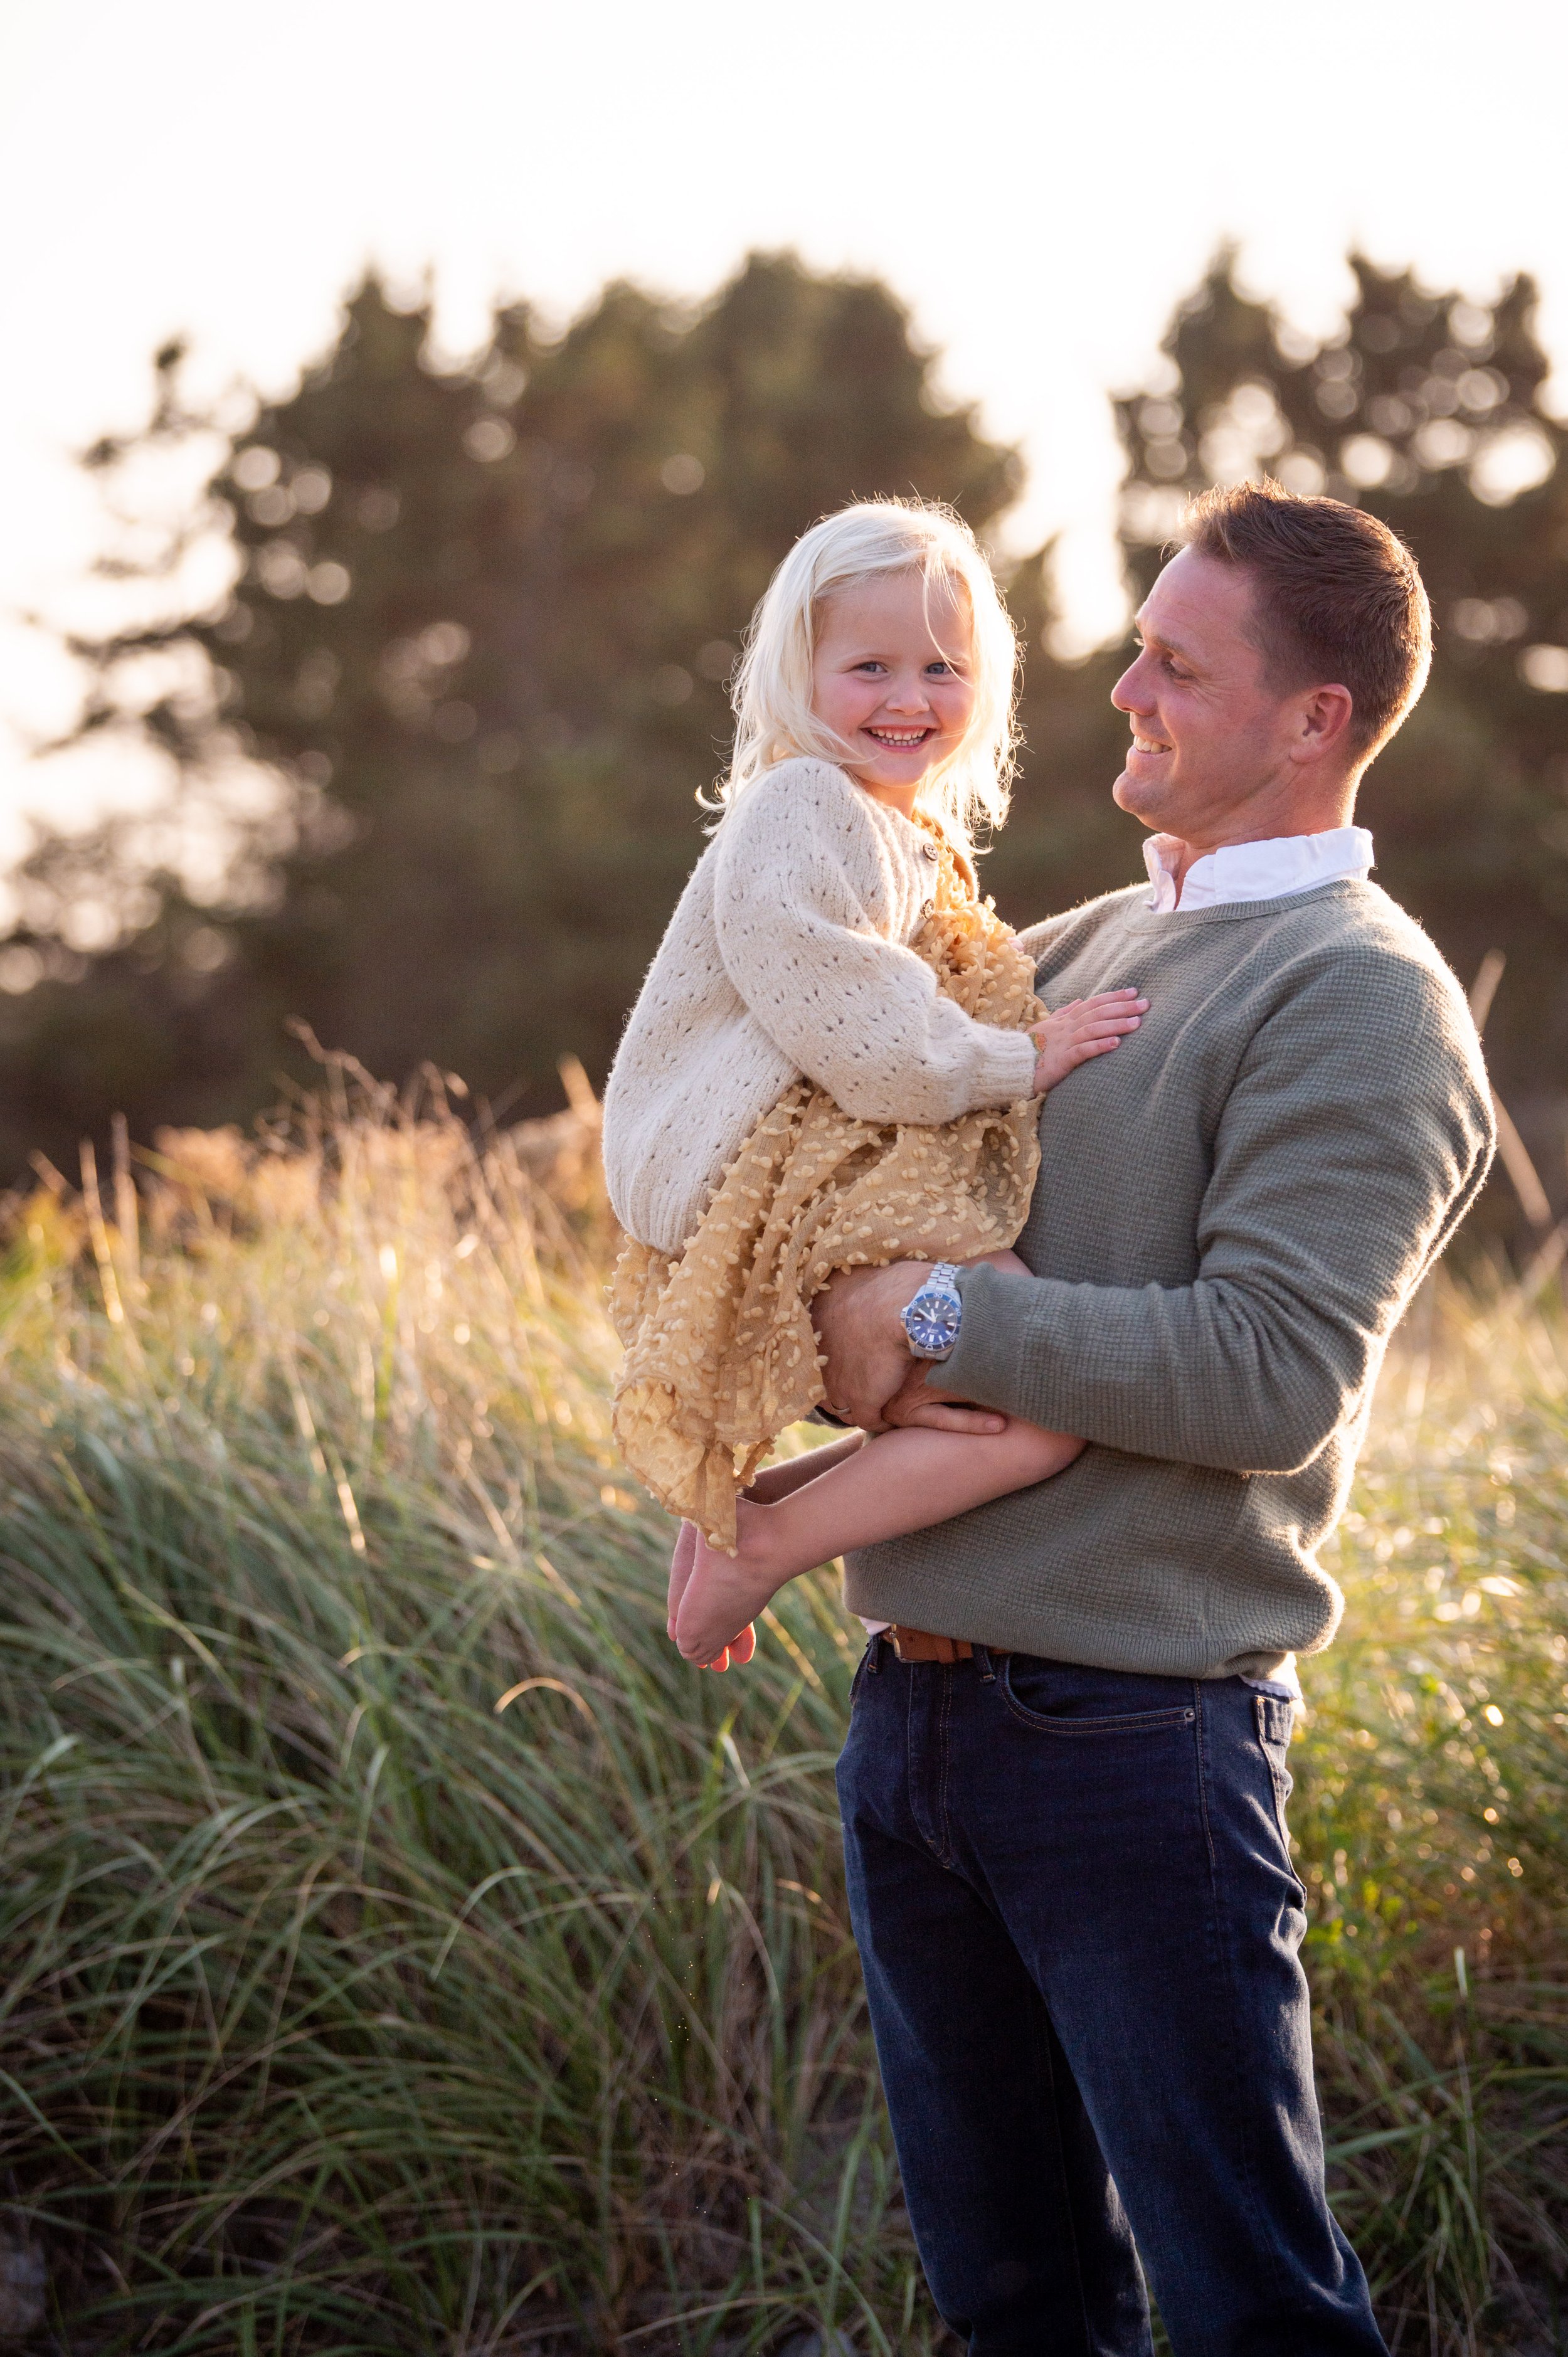 lindsay murphy photography | portland maine family photographer | dad and daughter cape elizabeth.jpg